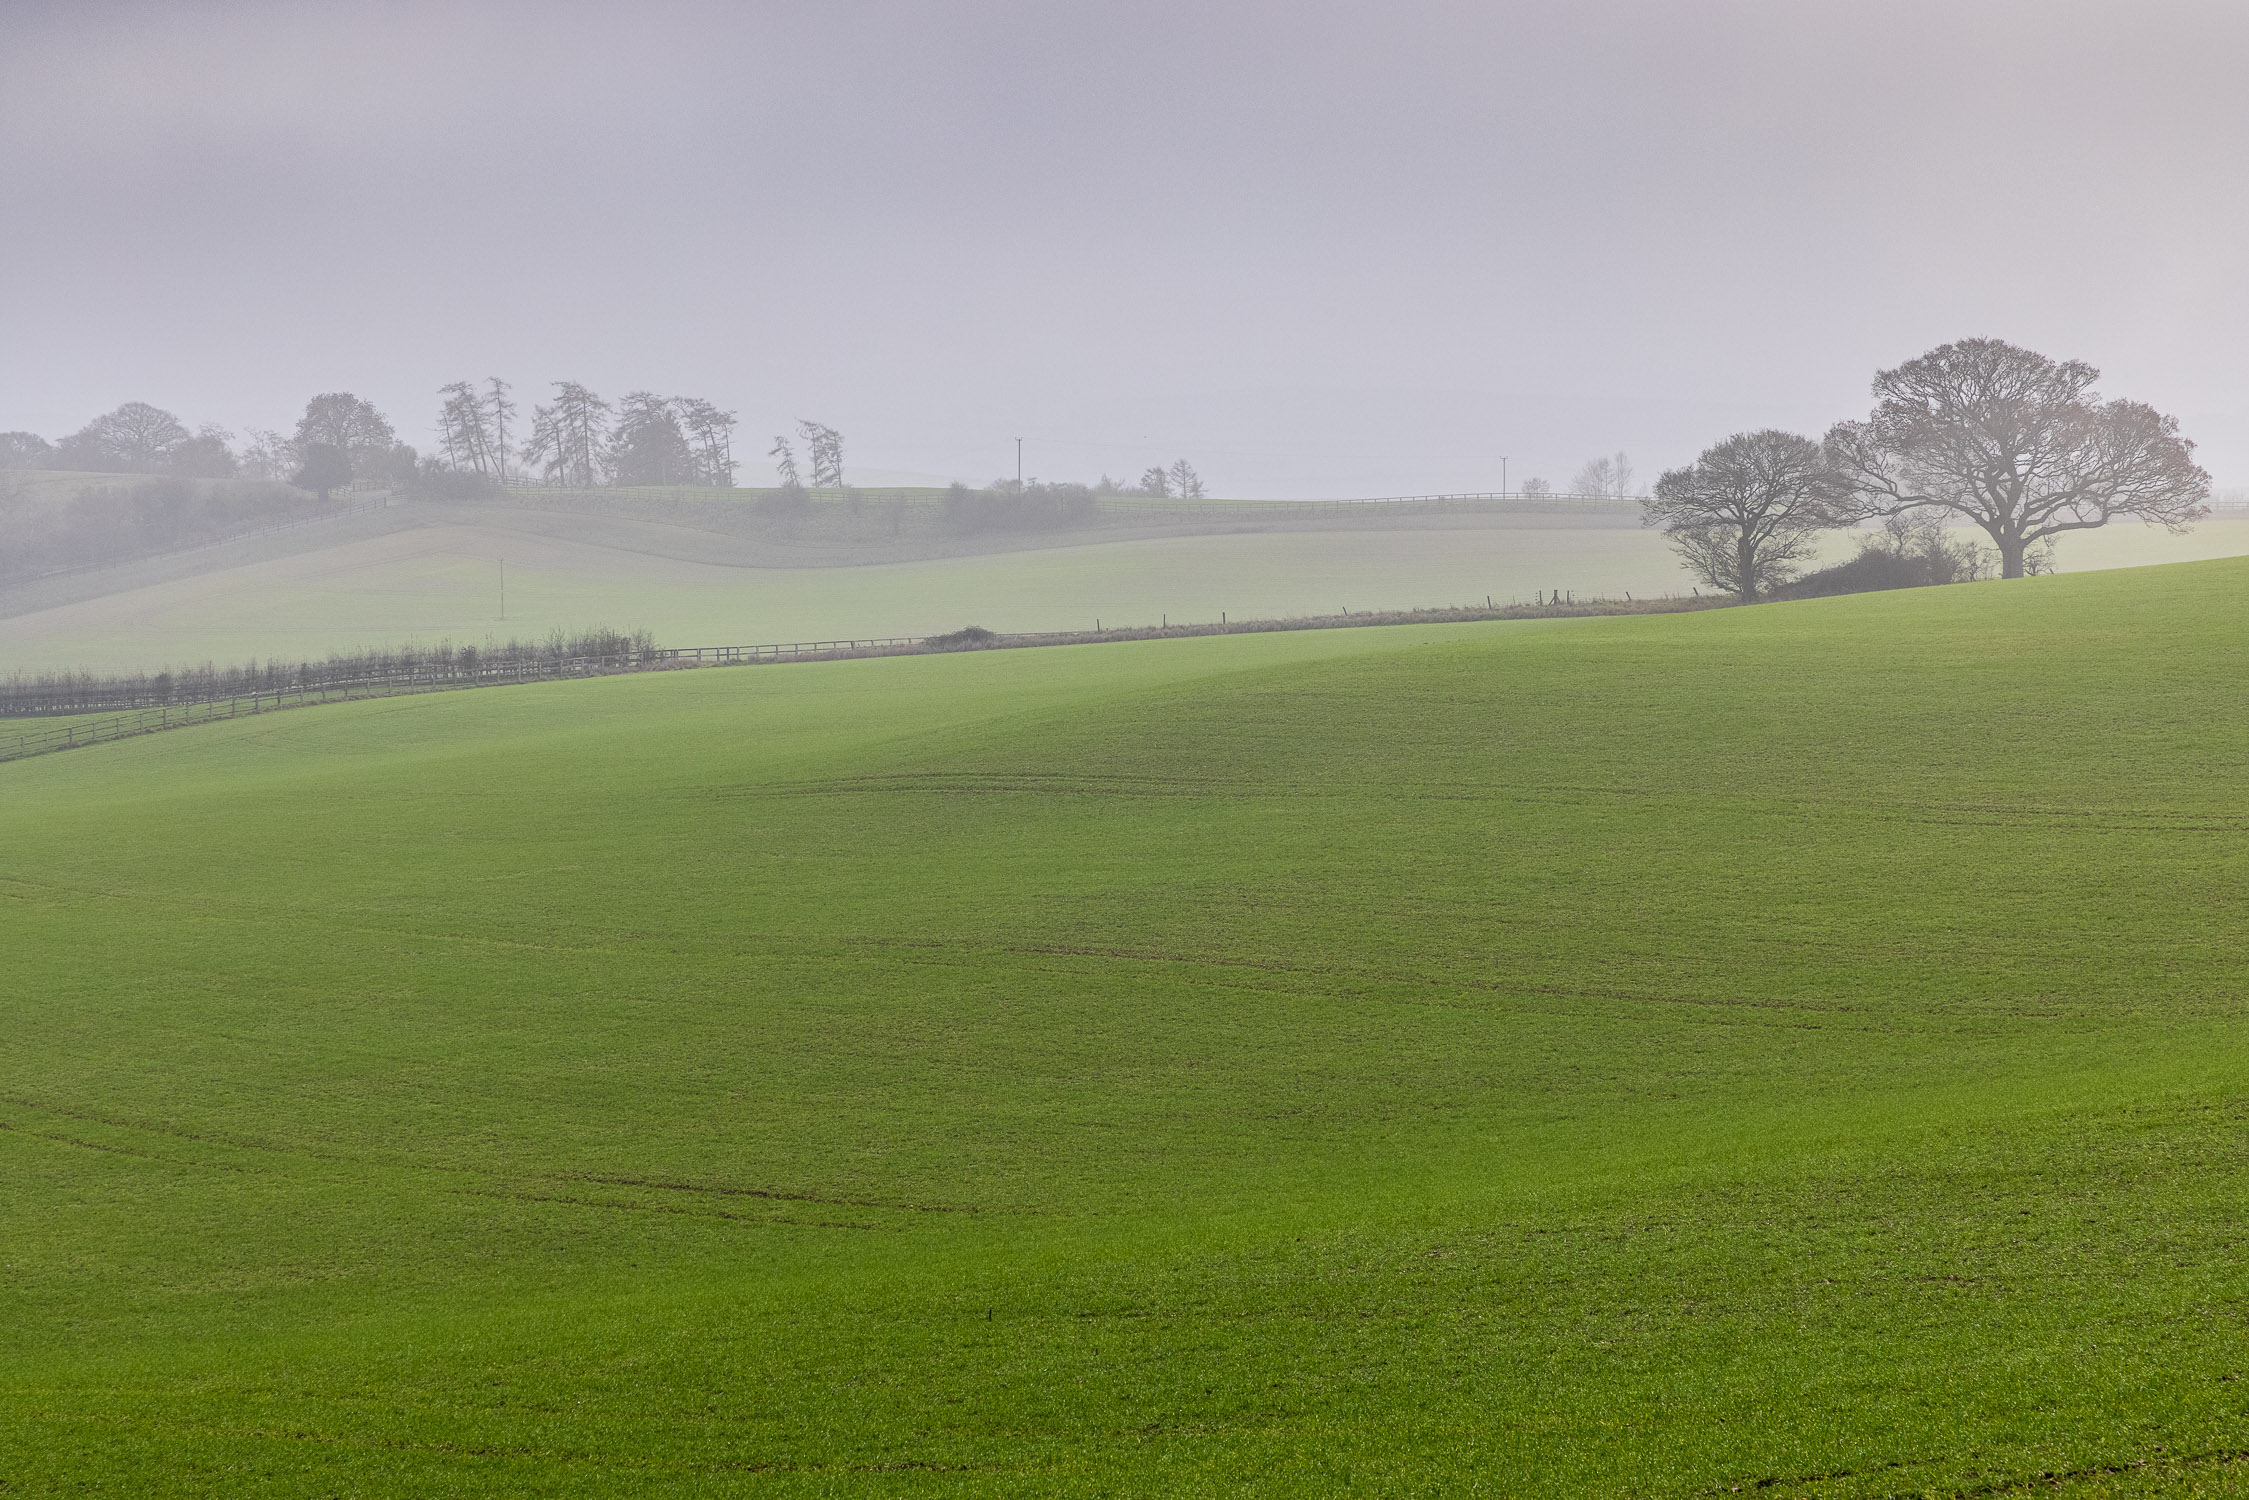 Misty afternoon on Cranborne Chase